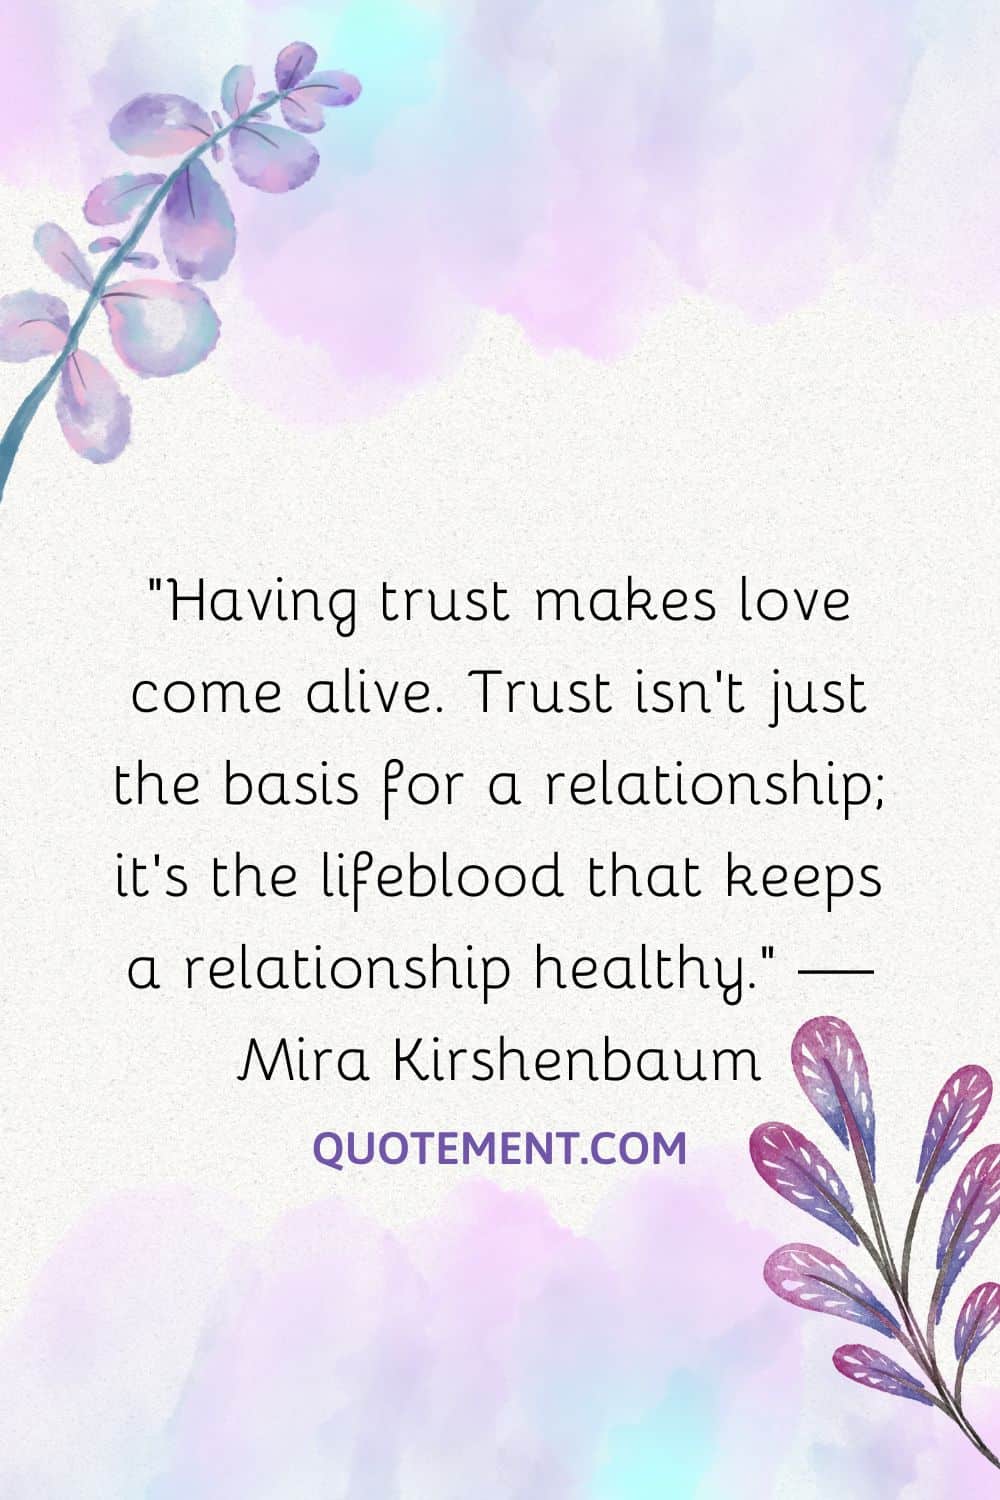 image of purple flowers representing trust quote for relationships
